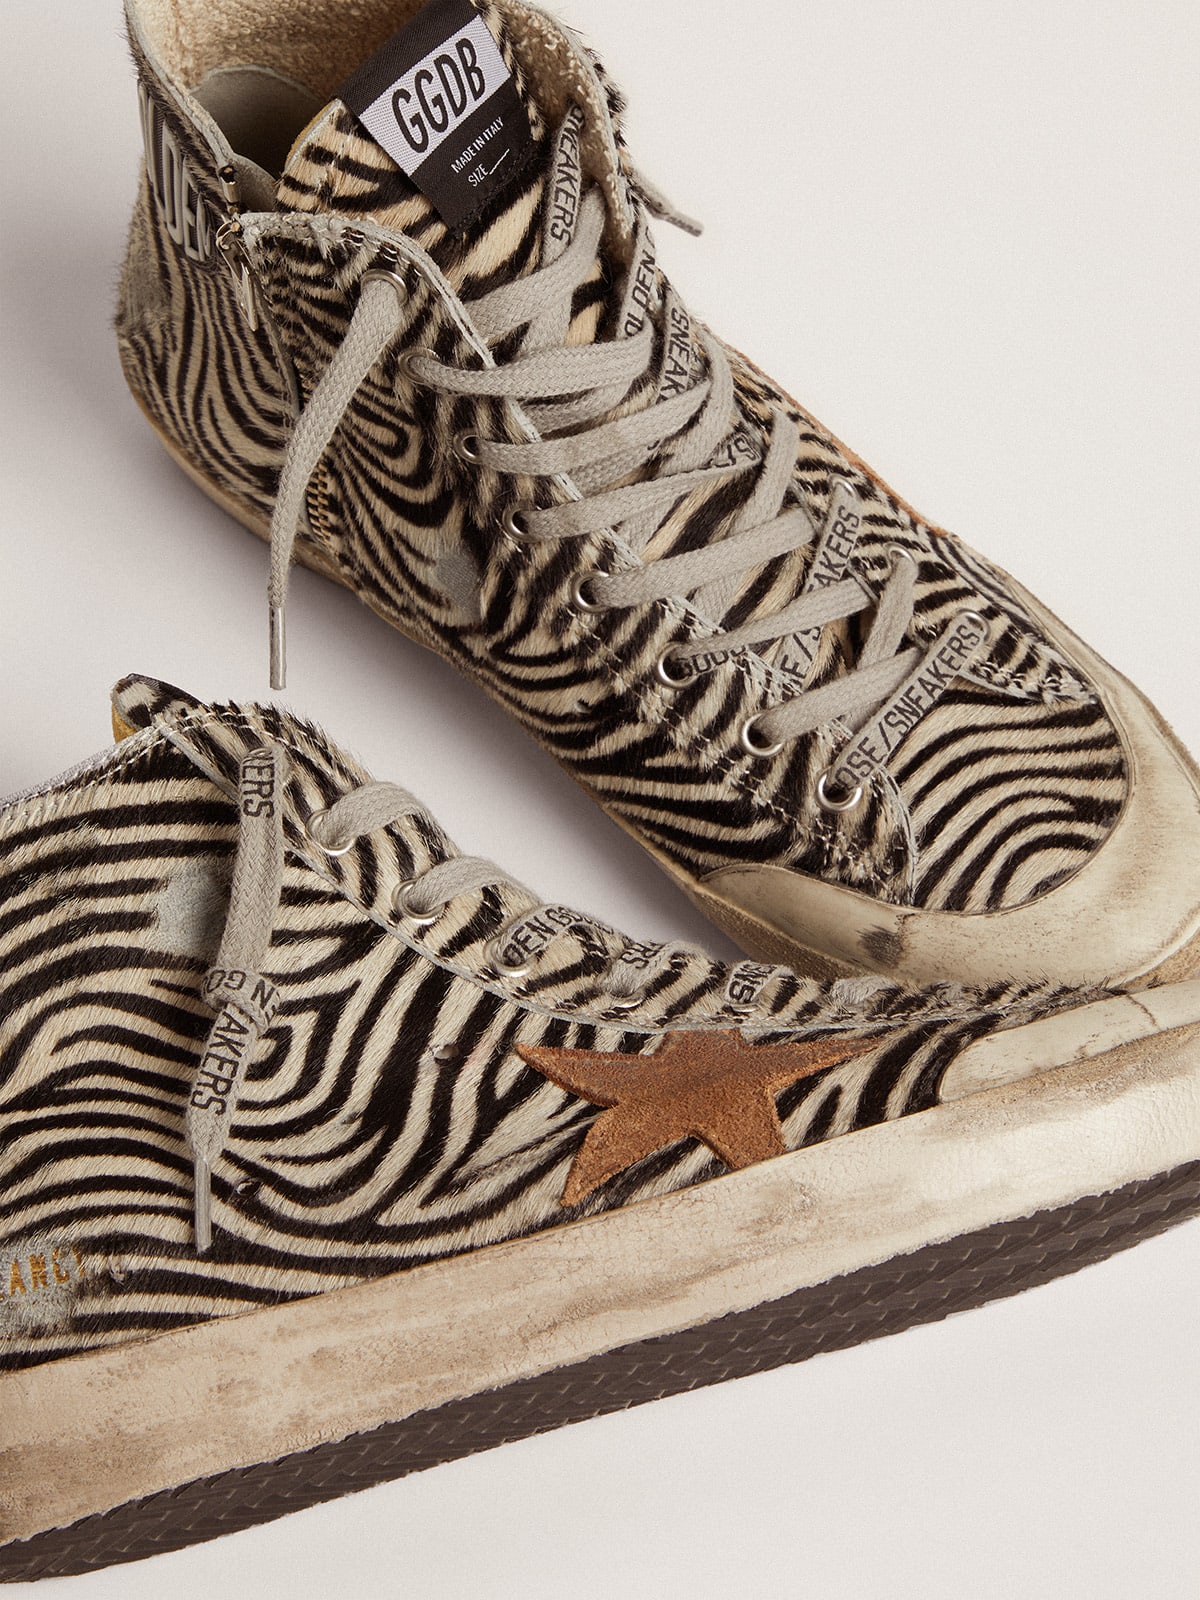 Golden Goose - Francy Penstar LTD sneakers in zebra-print pony skin with tobacco-colored suede star and black leather heel tab in 